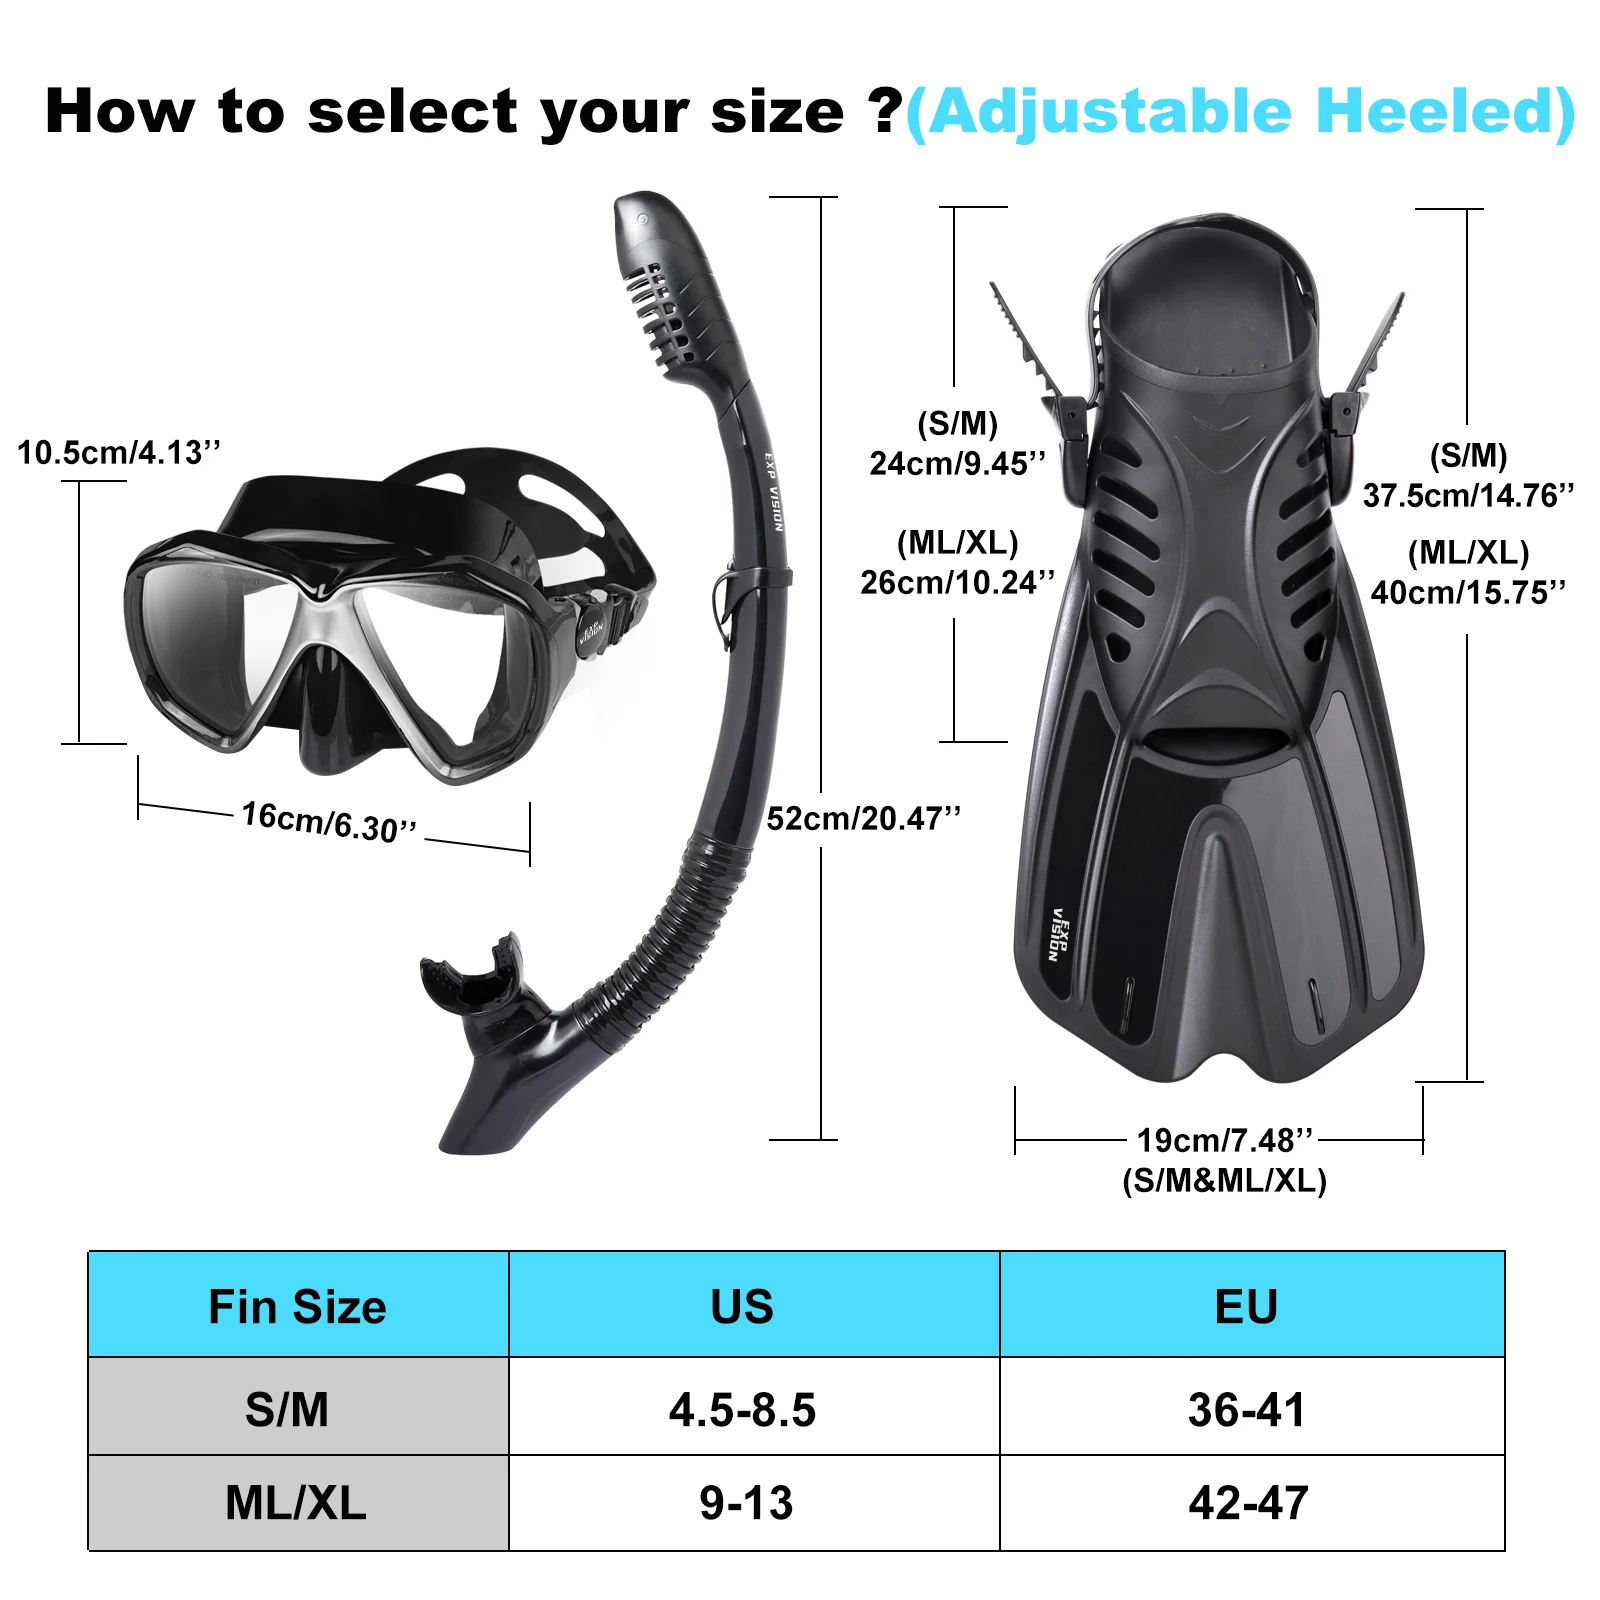 Snorkeling Gear for Adult, Anti-fog Diving Mask, Anti-Leak Dry Top Snorkel and Dive Flippers, Diving Package, 180 °